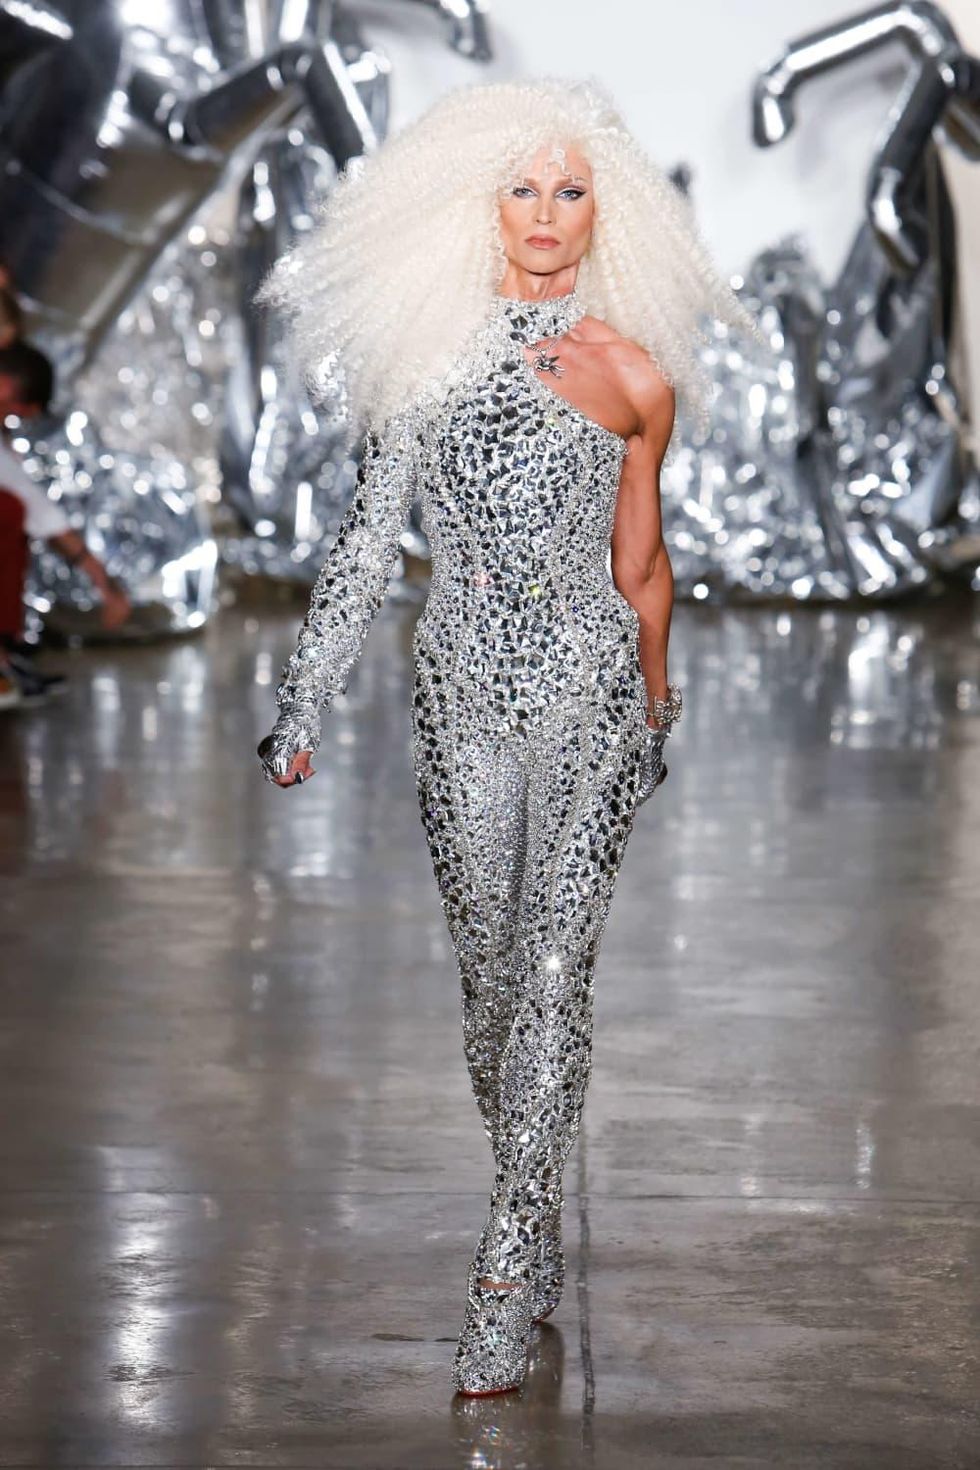 The Blonds spring 2017 collection